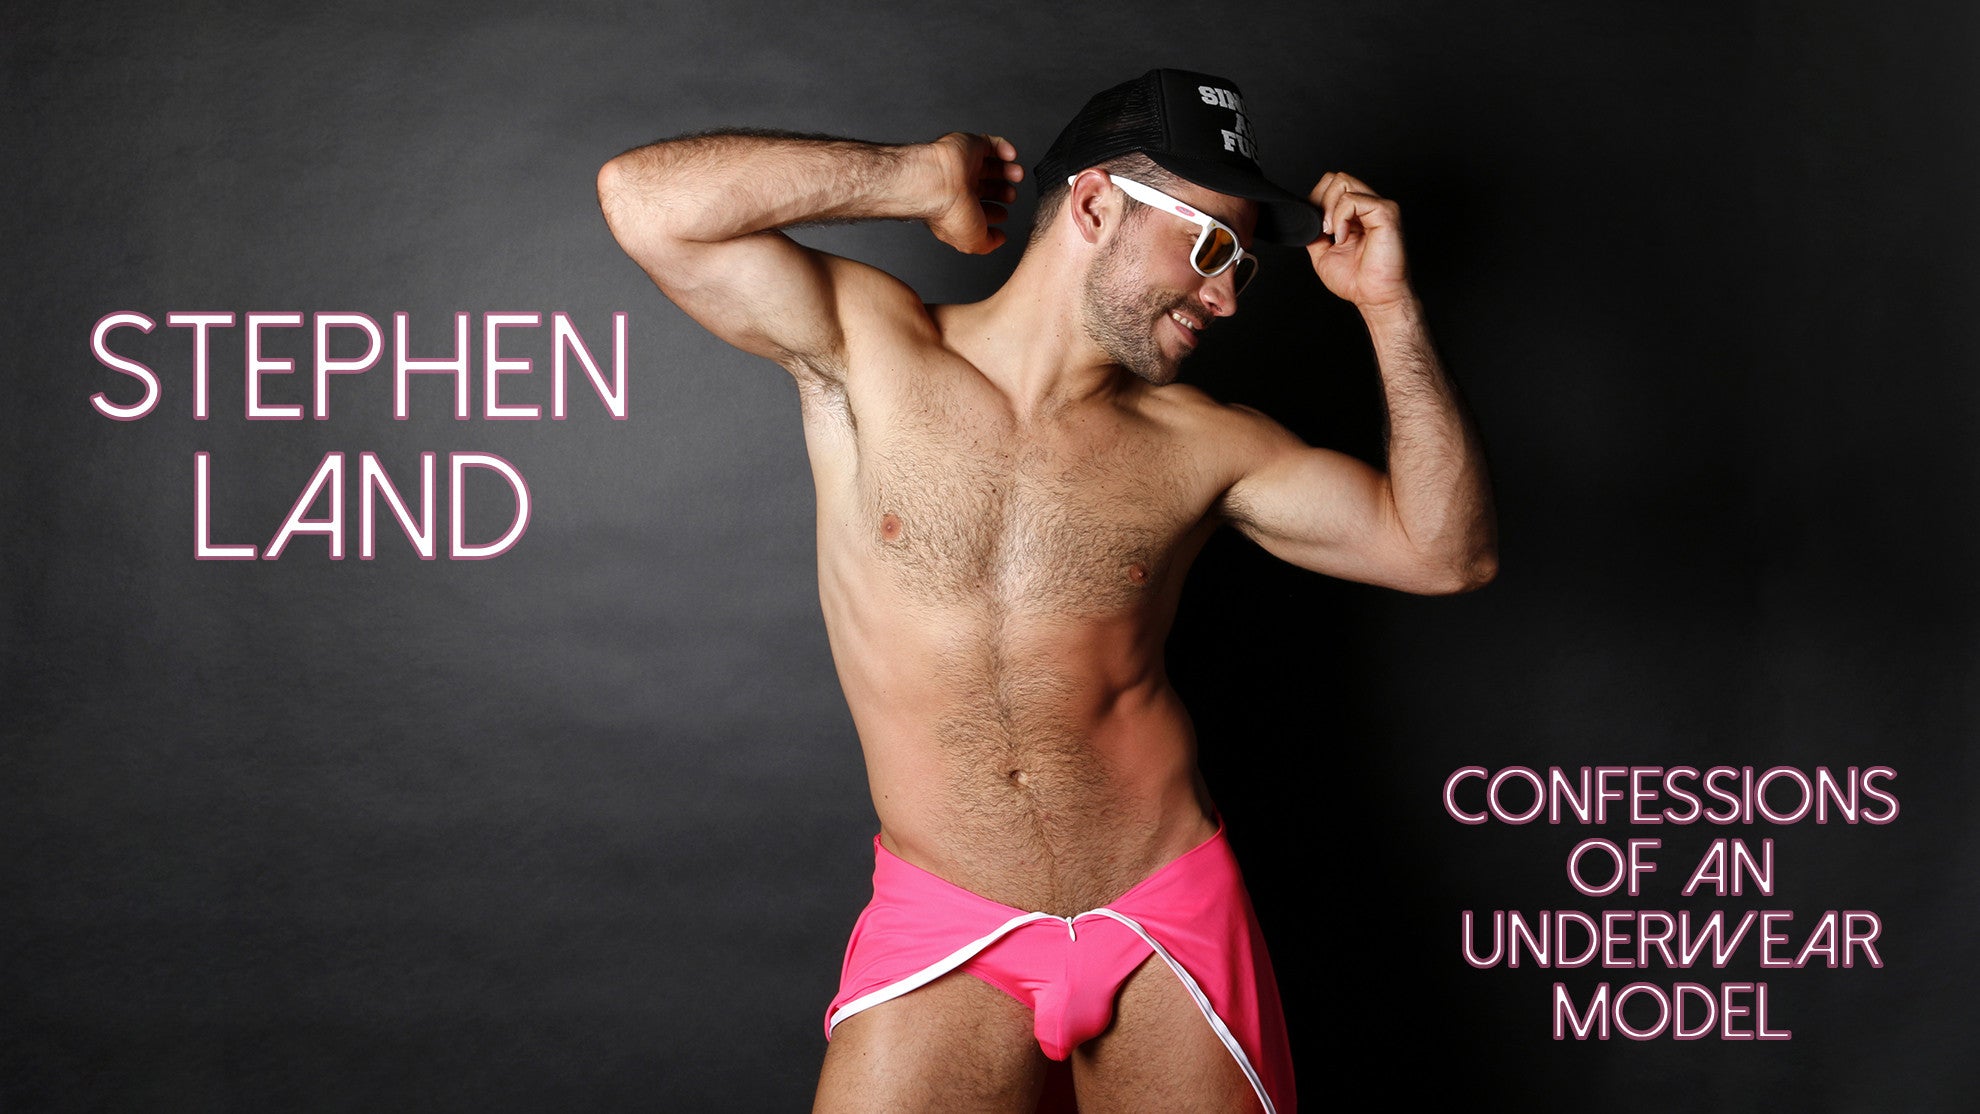 Confessions of an Underwear Model: Stephen Land